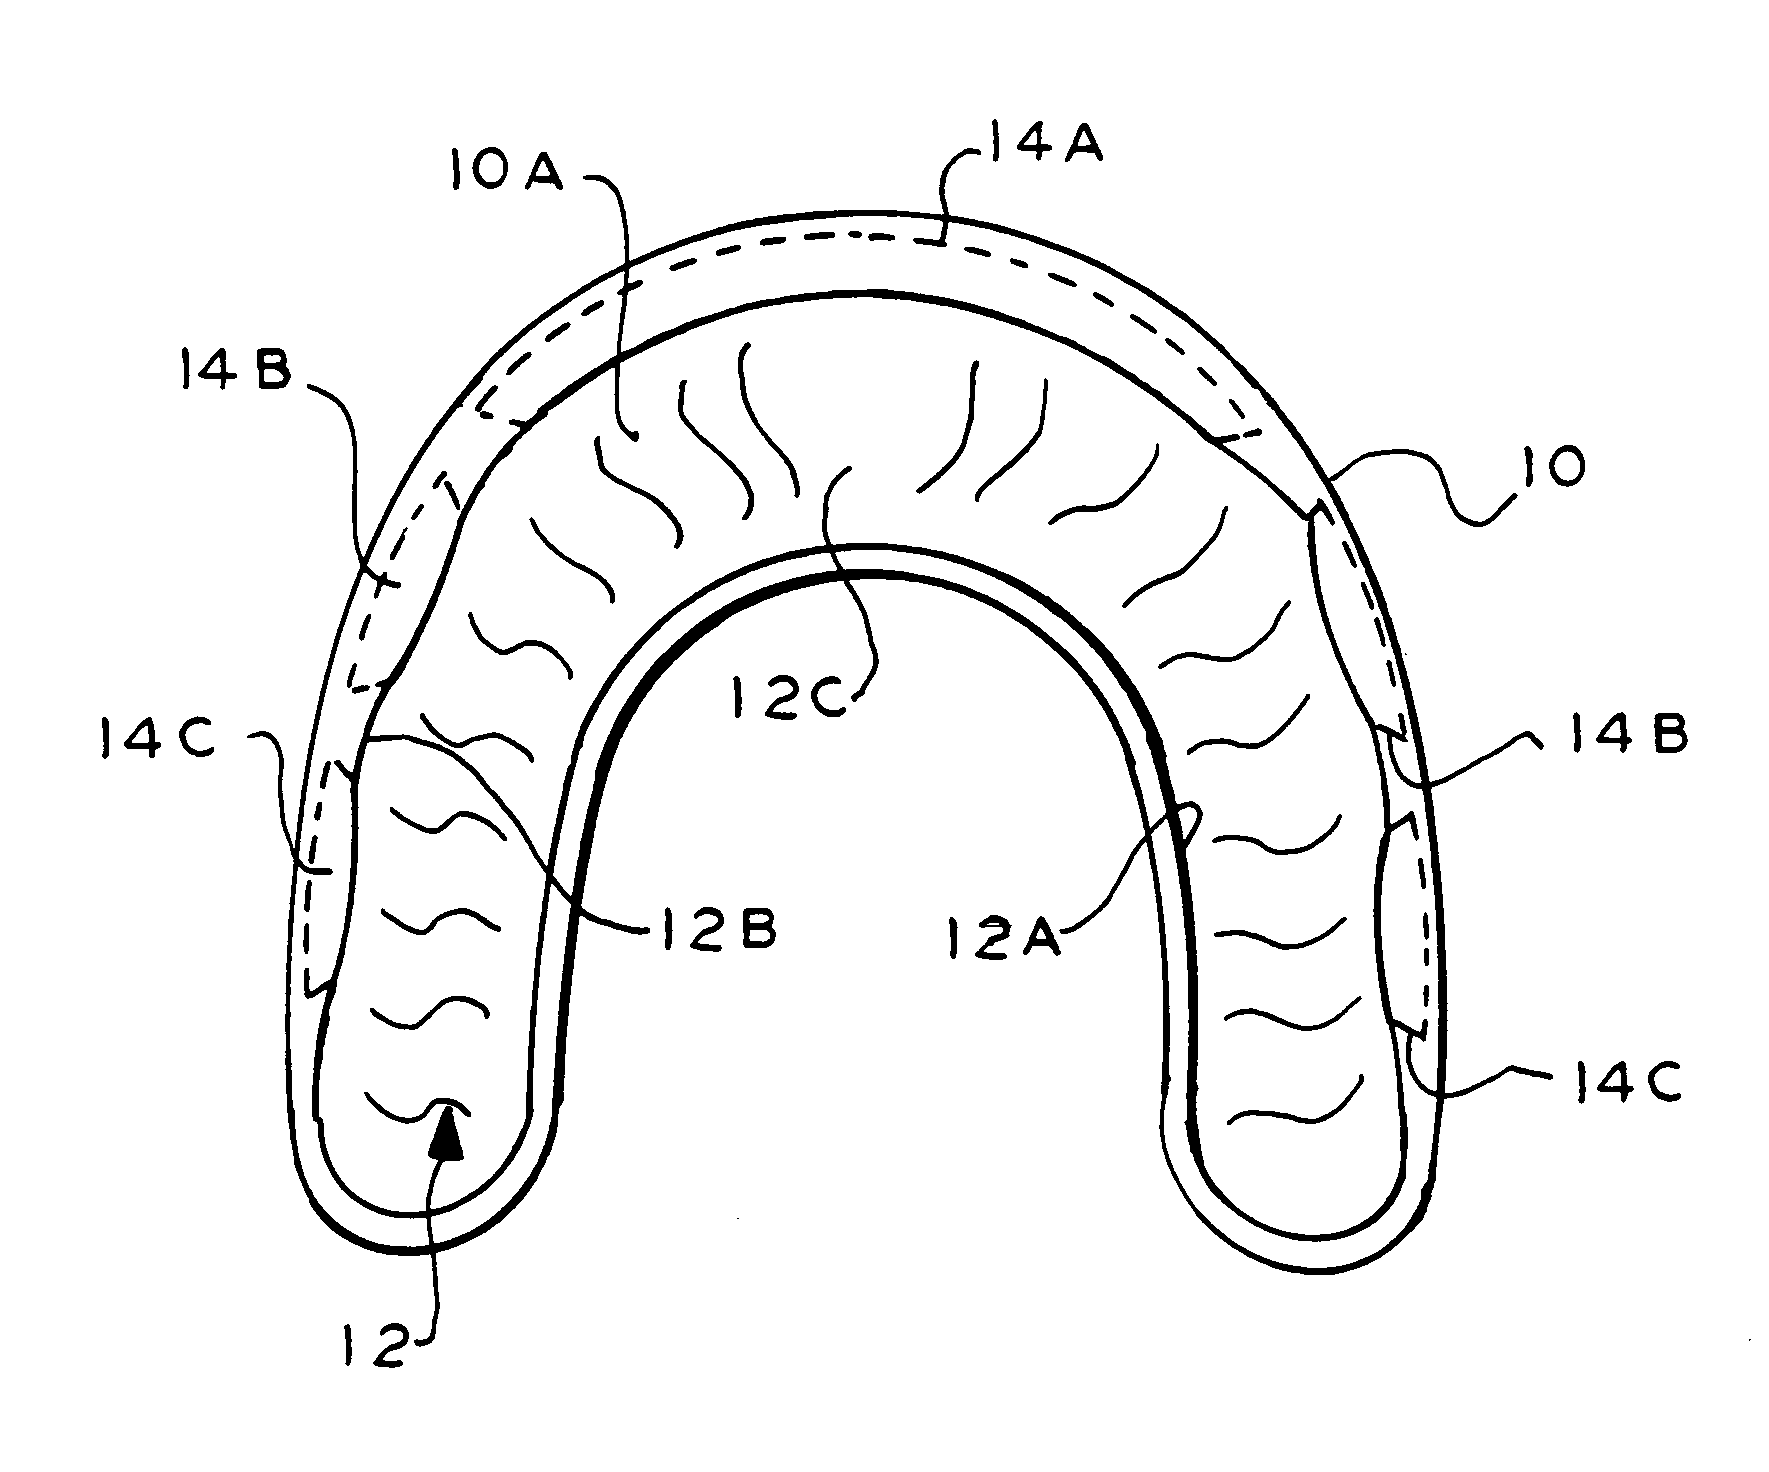 Therapeutic and protective dental device useful as an intra-oral delivery system